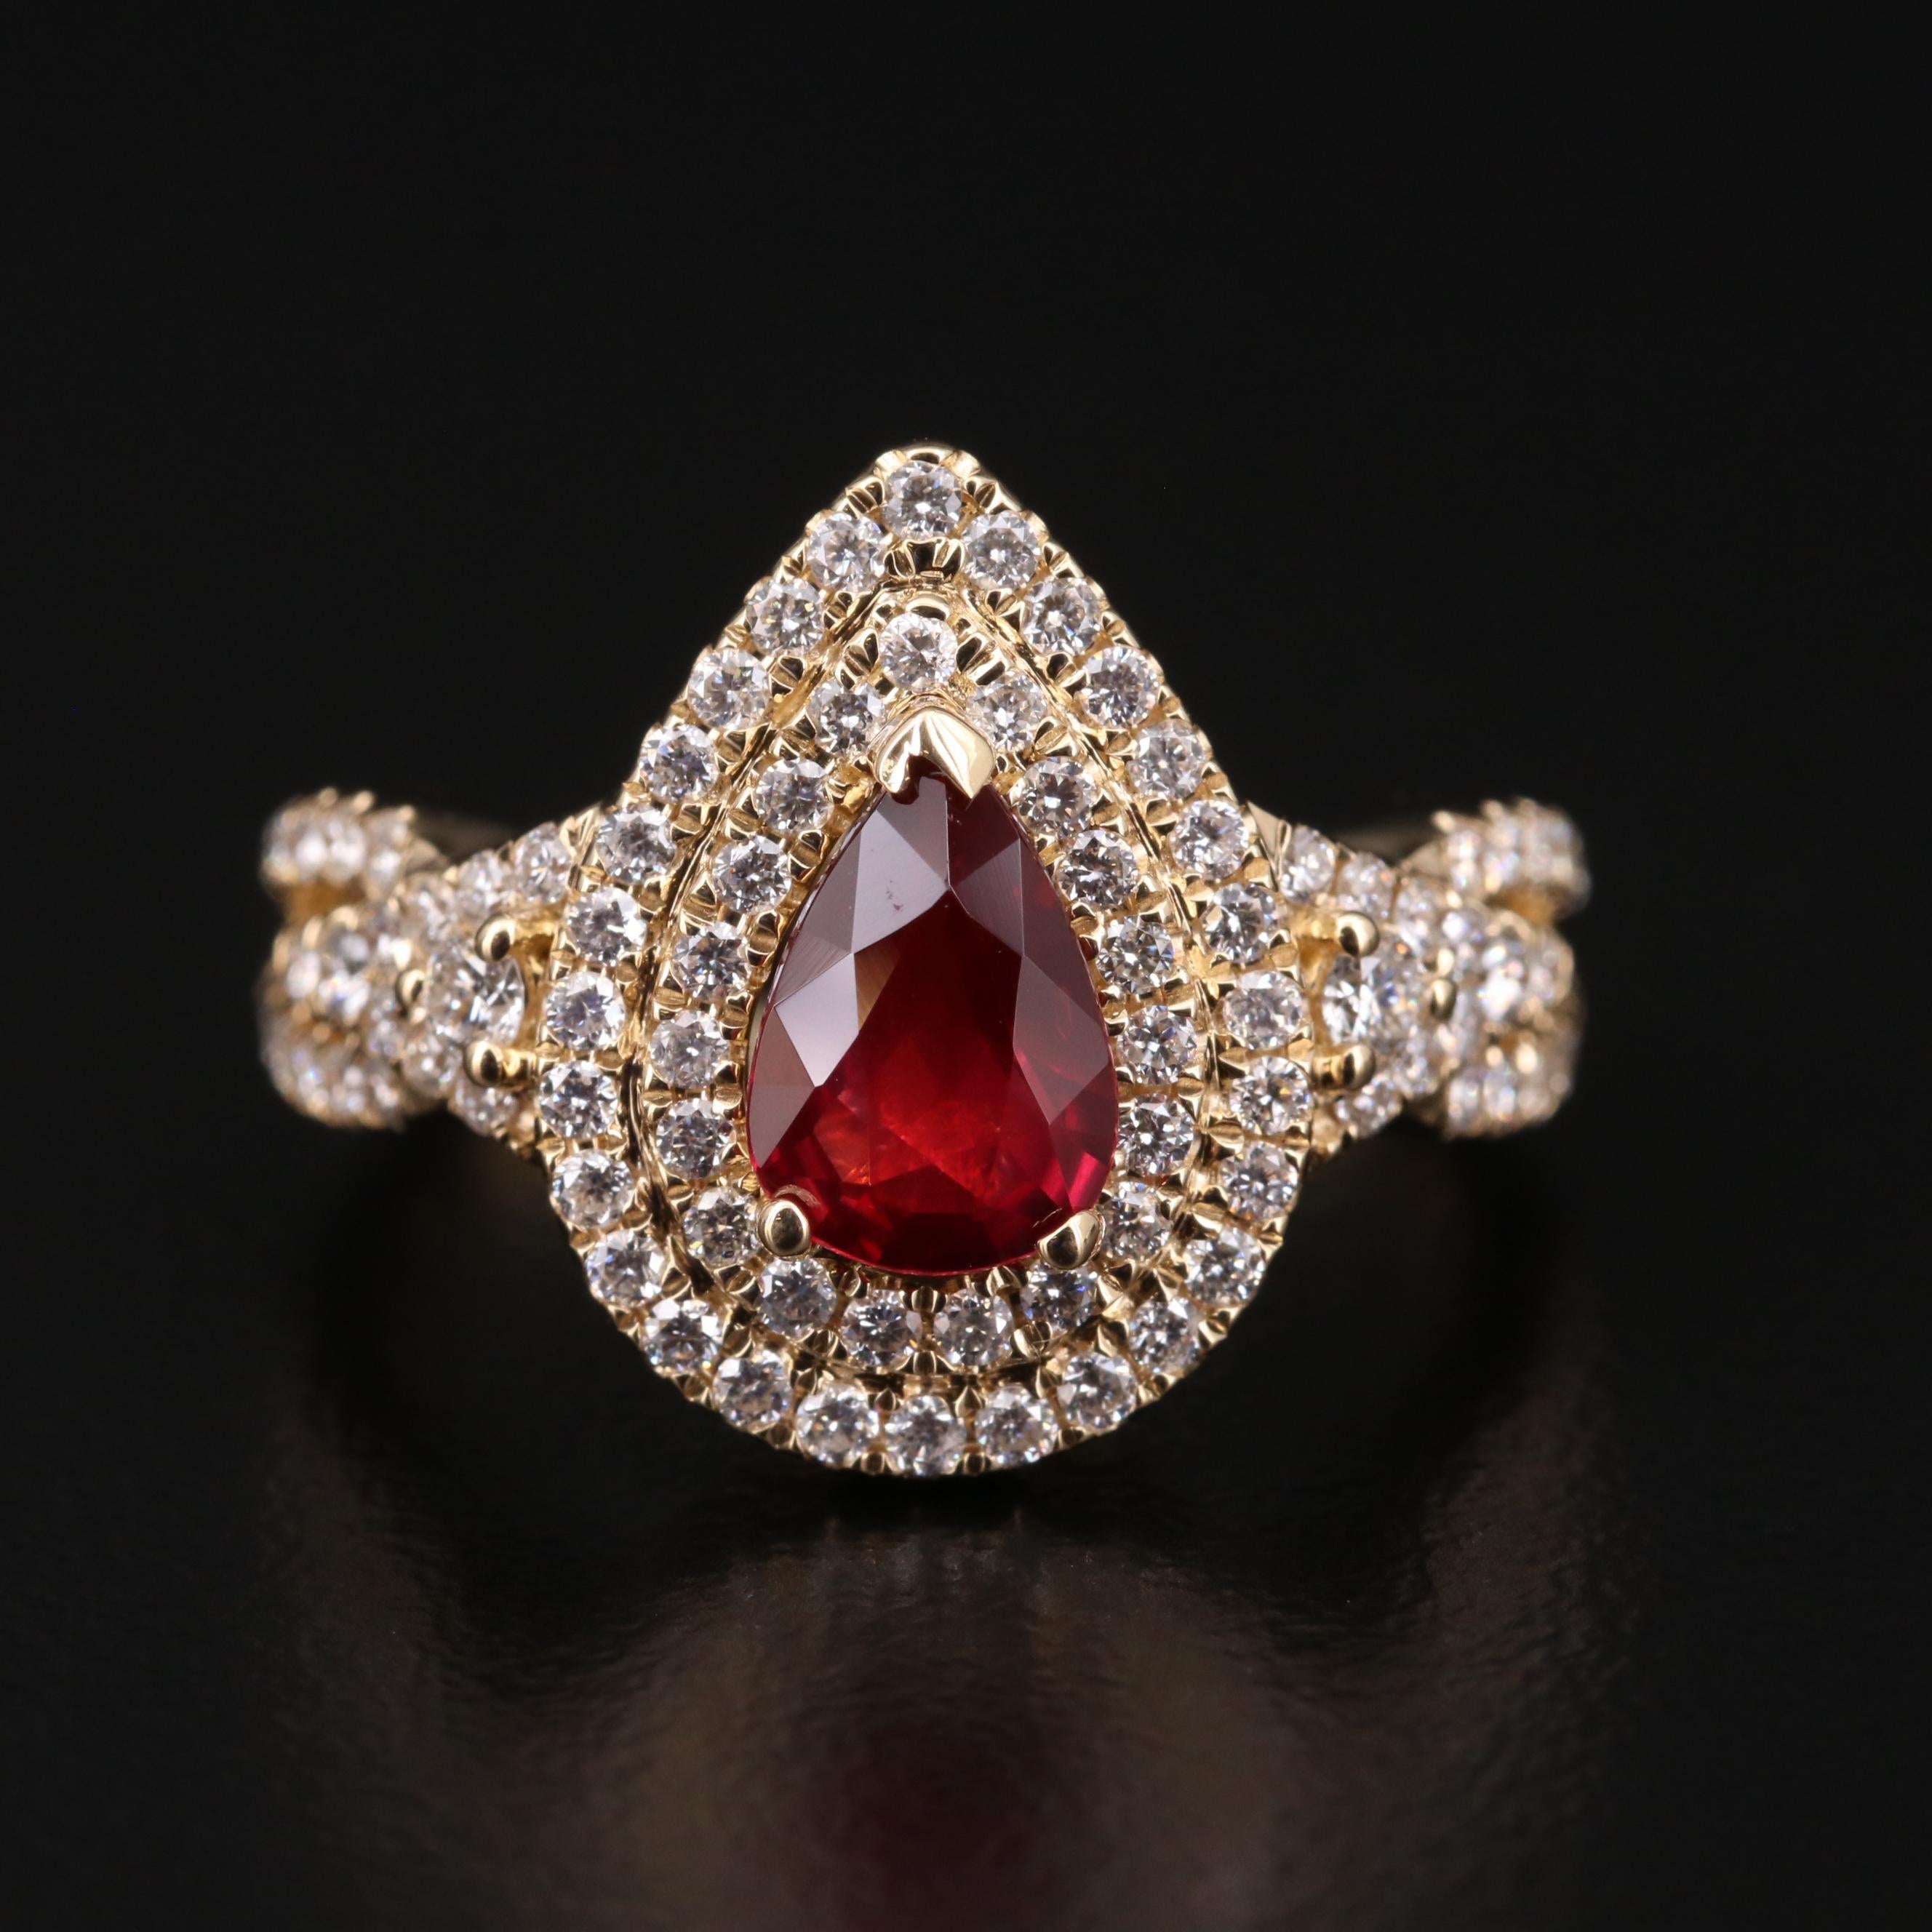 For Sale:  Halo Pear Cut Ruby Engagement Ring Ruby Diamond Yellow Gold Wedding Ring  6